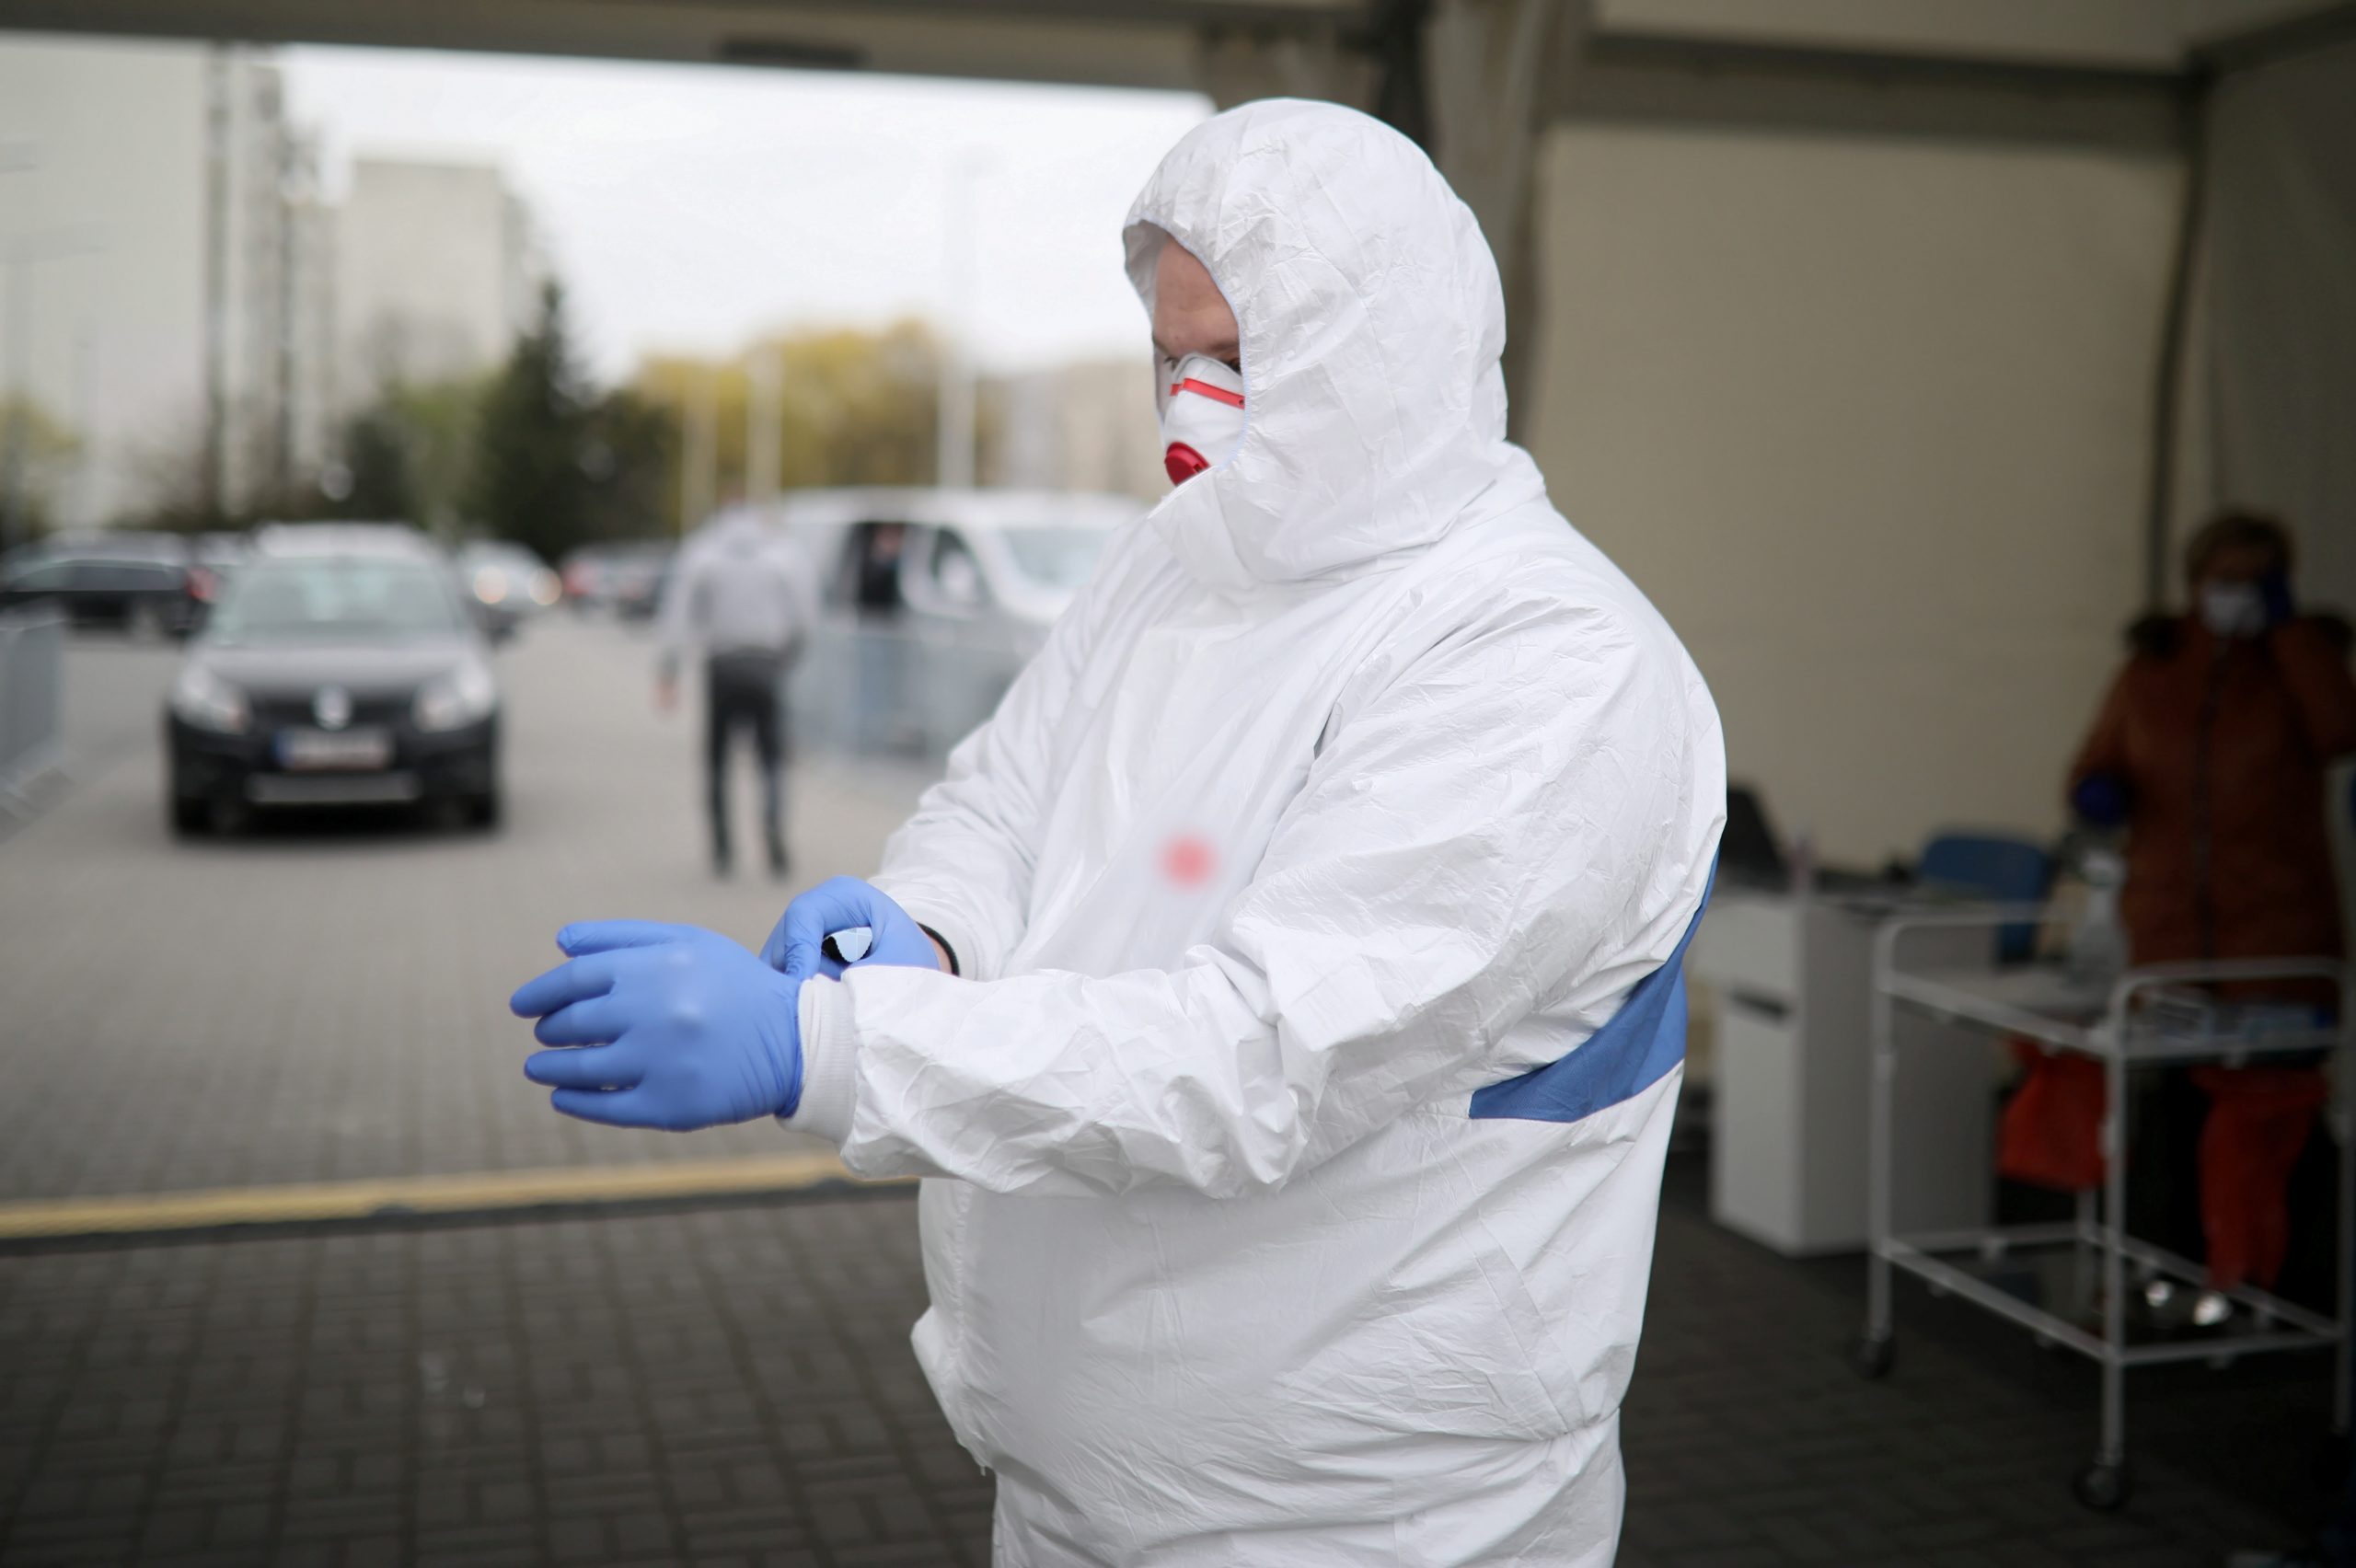 epa08363510 A Polish medical staff works at a drive-thru COVID-19 testing lab in Warsaw, Poland, 15 April 2020. Countries around the world are taking increased measures to stem the widespread of the SARS-CoV-2 coronavirus which causes the COVID-19 disease.  EPA/LESZEK SZYMANSKI POLAND OUT